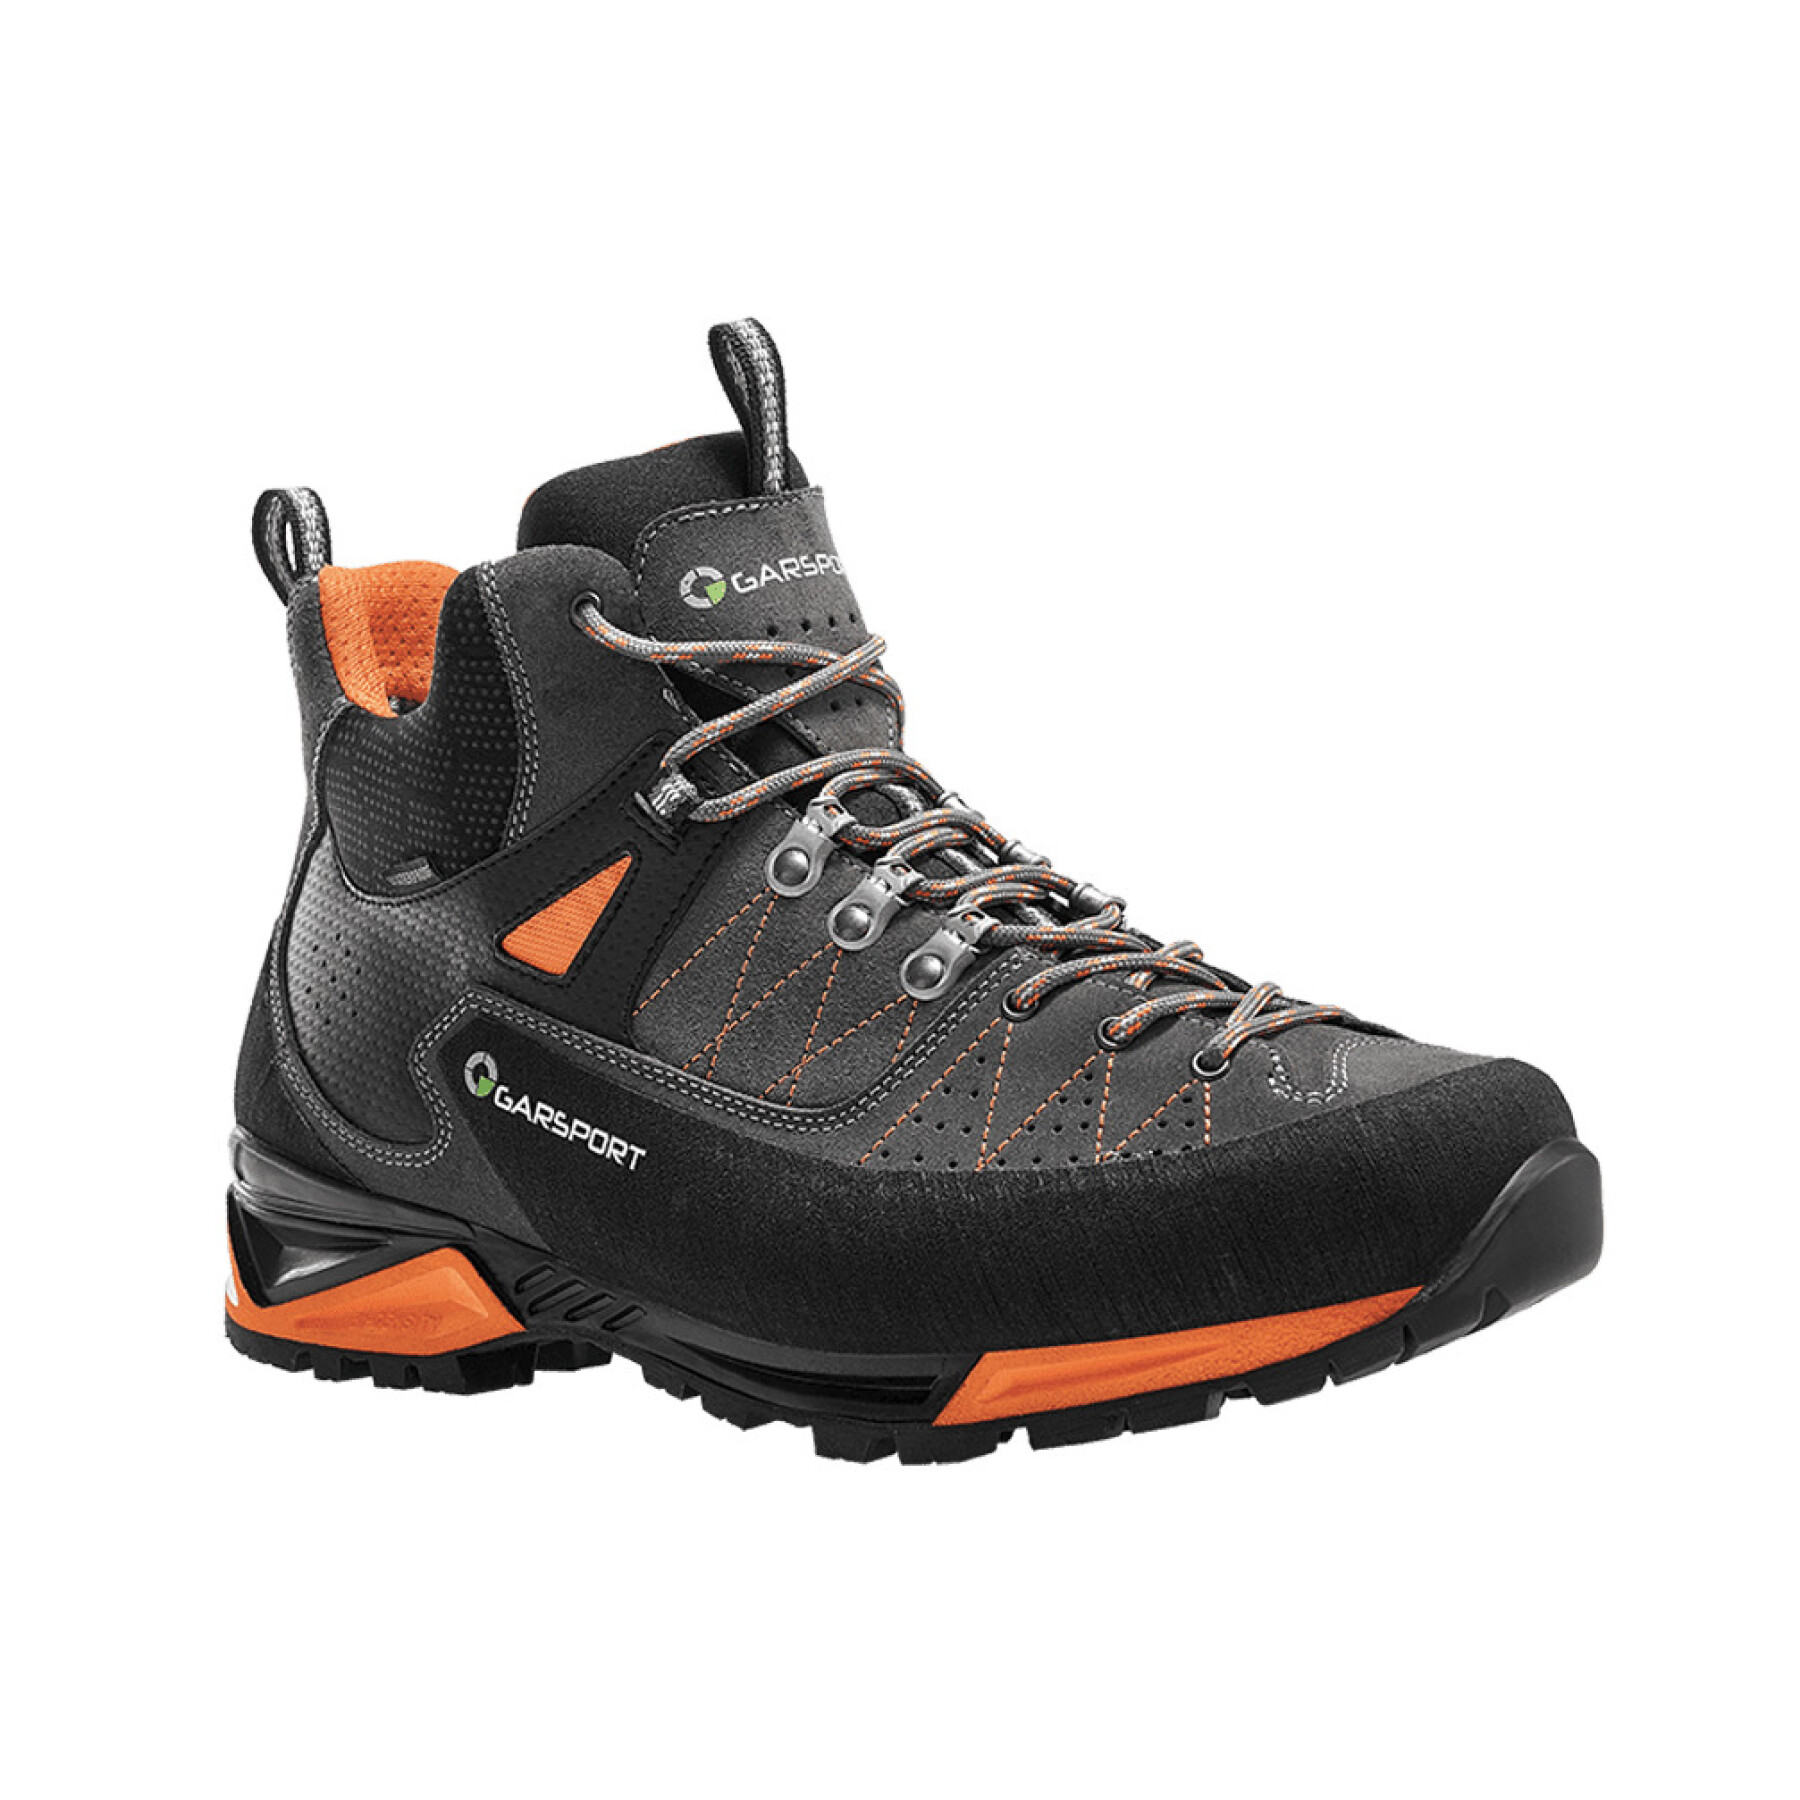 Hiking shoes Garsport Mountain Tech Mid WP